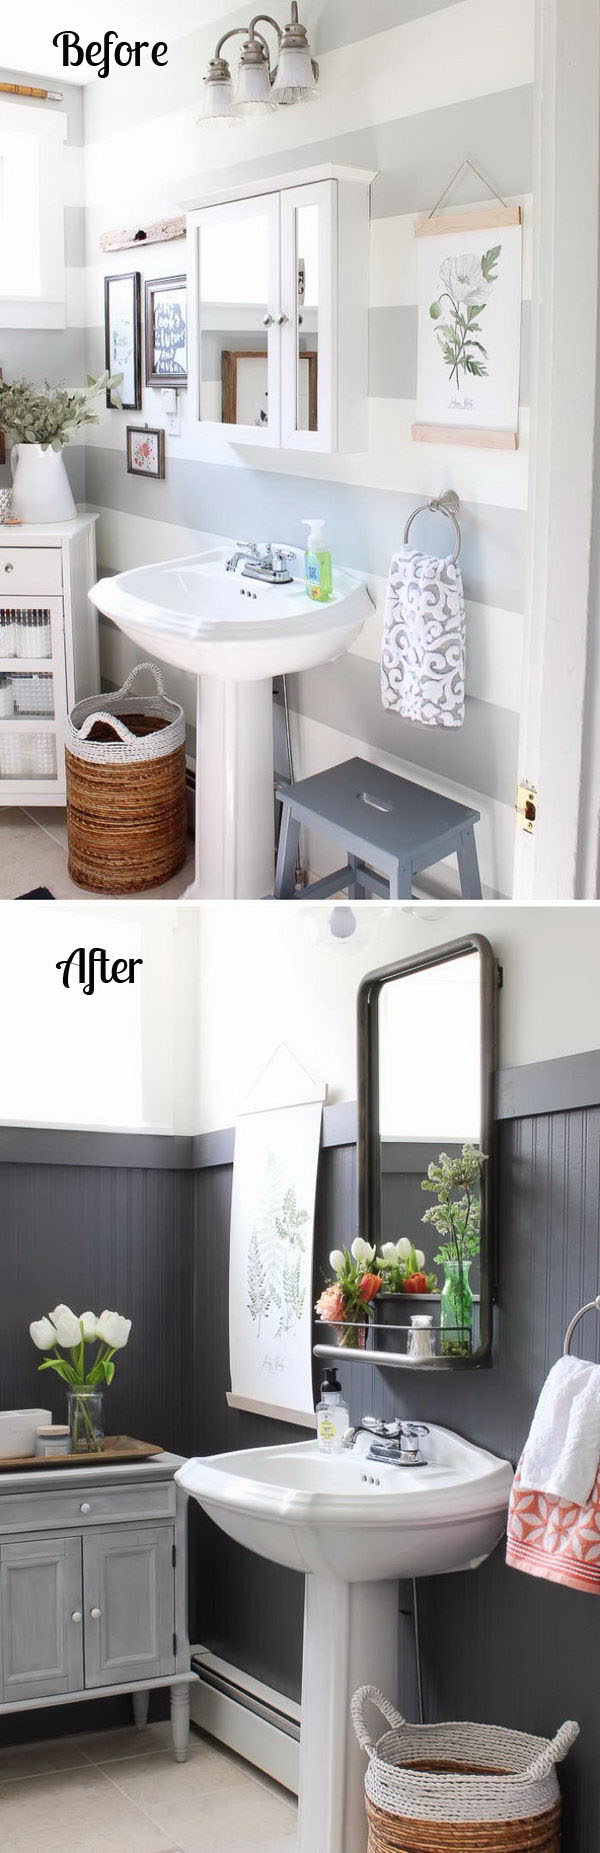 50+ Gorgeous Bathroom Makeovers With Before And After Photos - Hative